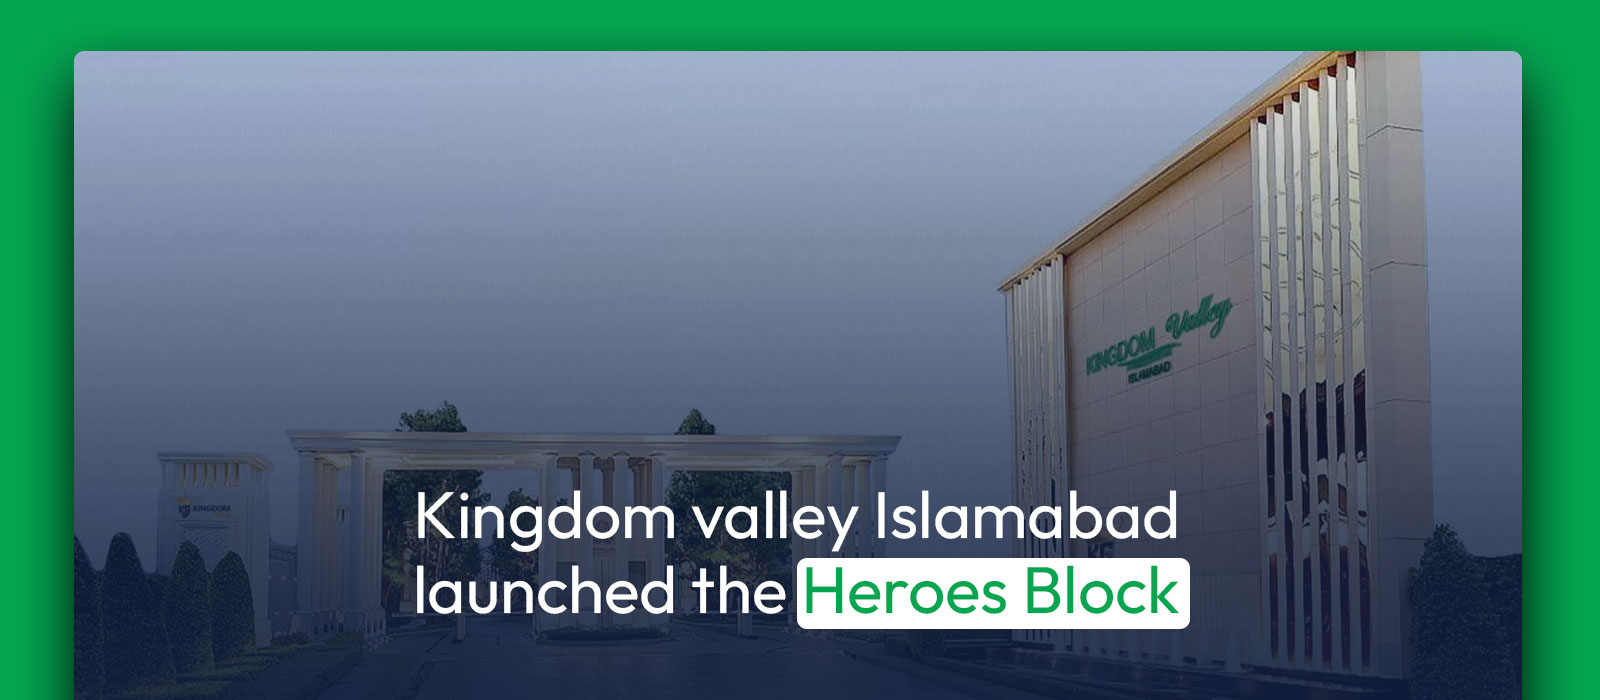 Kingdom valley Islamabad launched the Heroes Block